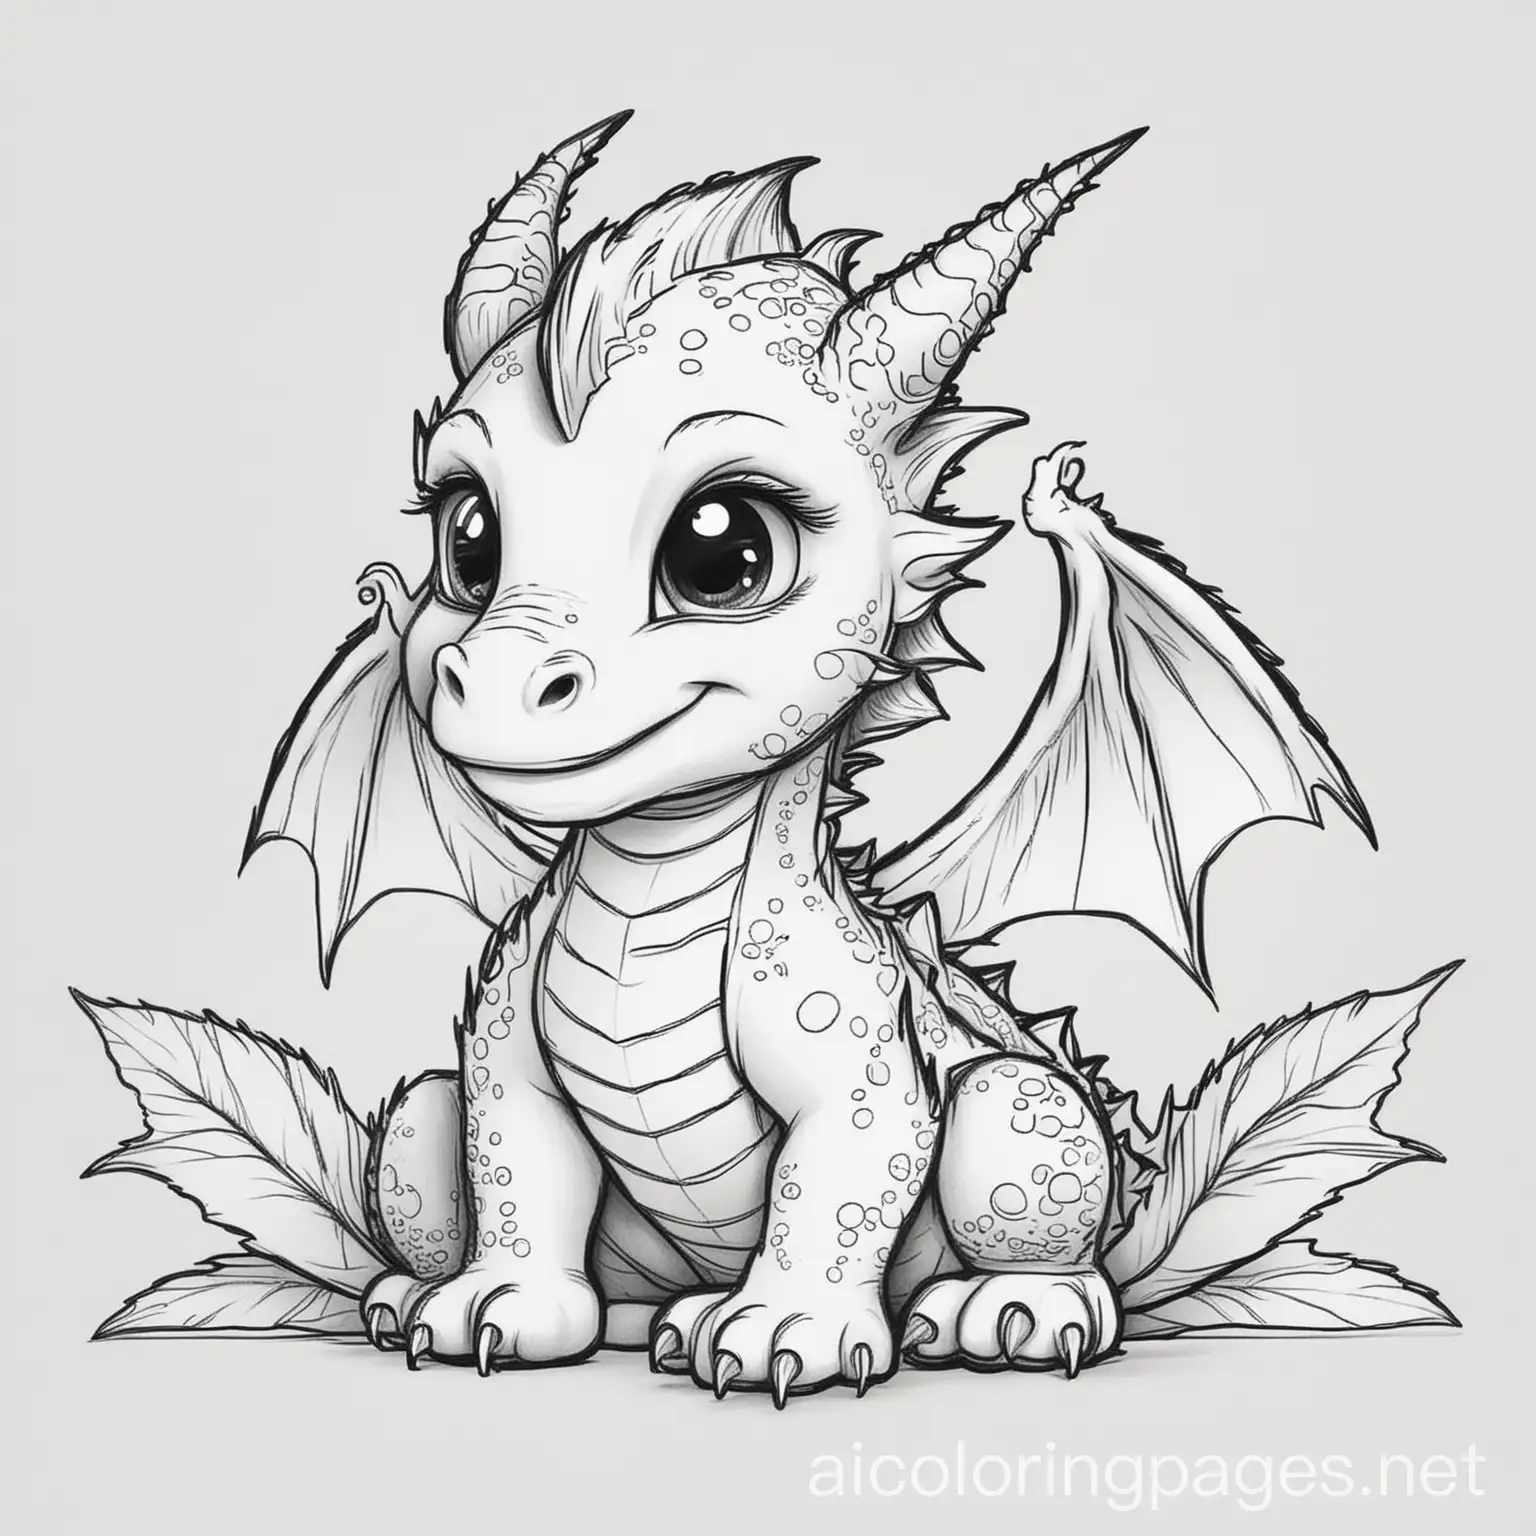 Baby-Dragon-Coloring-Page-Simple-Line-Art-on-White-Background